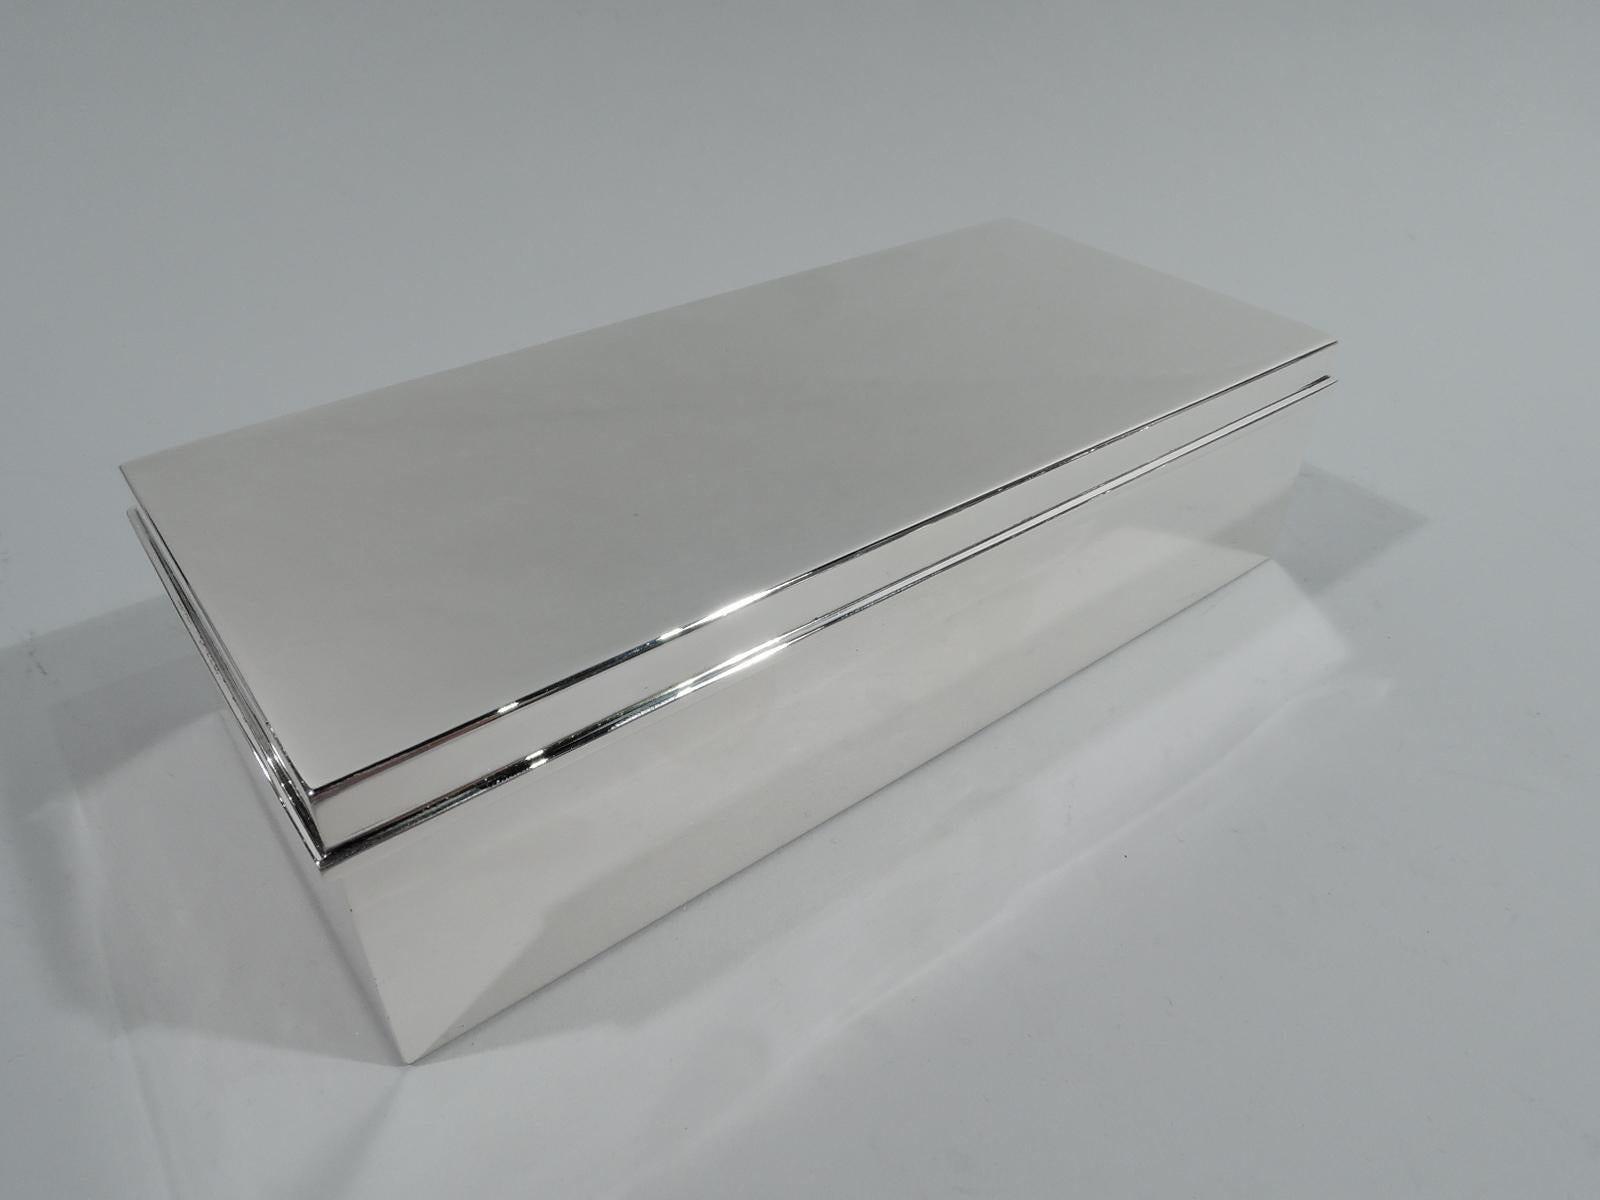 Stylish Mid-Century Modern sterling silver desk box. Made by Tiffany & Co. in New York. Rectangular with straight sides. Cover flat and hinged with molded rim. Box interior cedar lined and partitioned. Cover interior gilt. Fully marked including